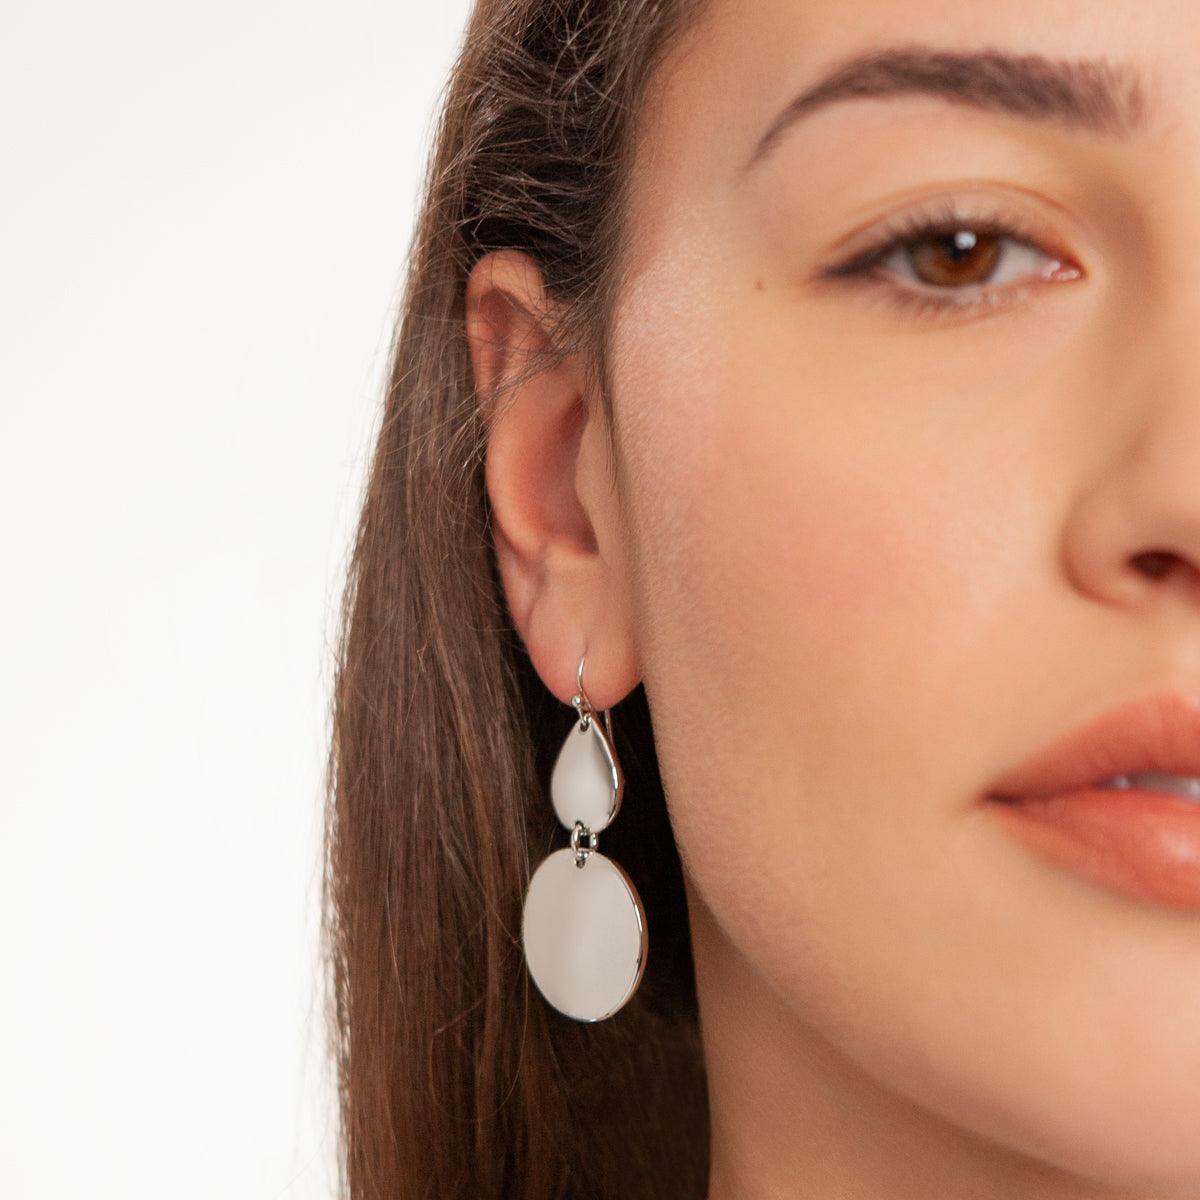 All About Earrings: From Studs to Statement Pieces